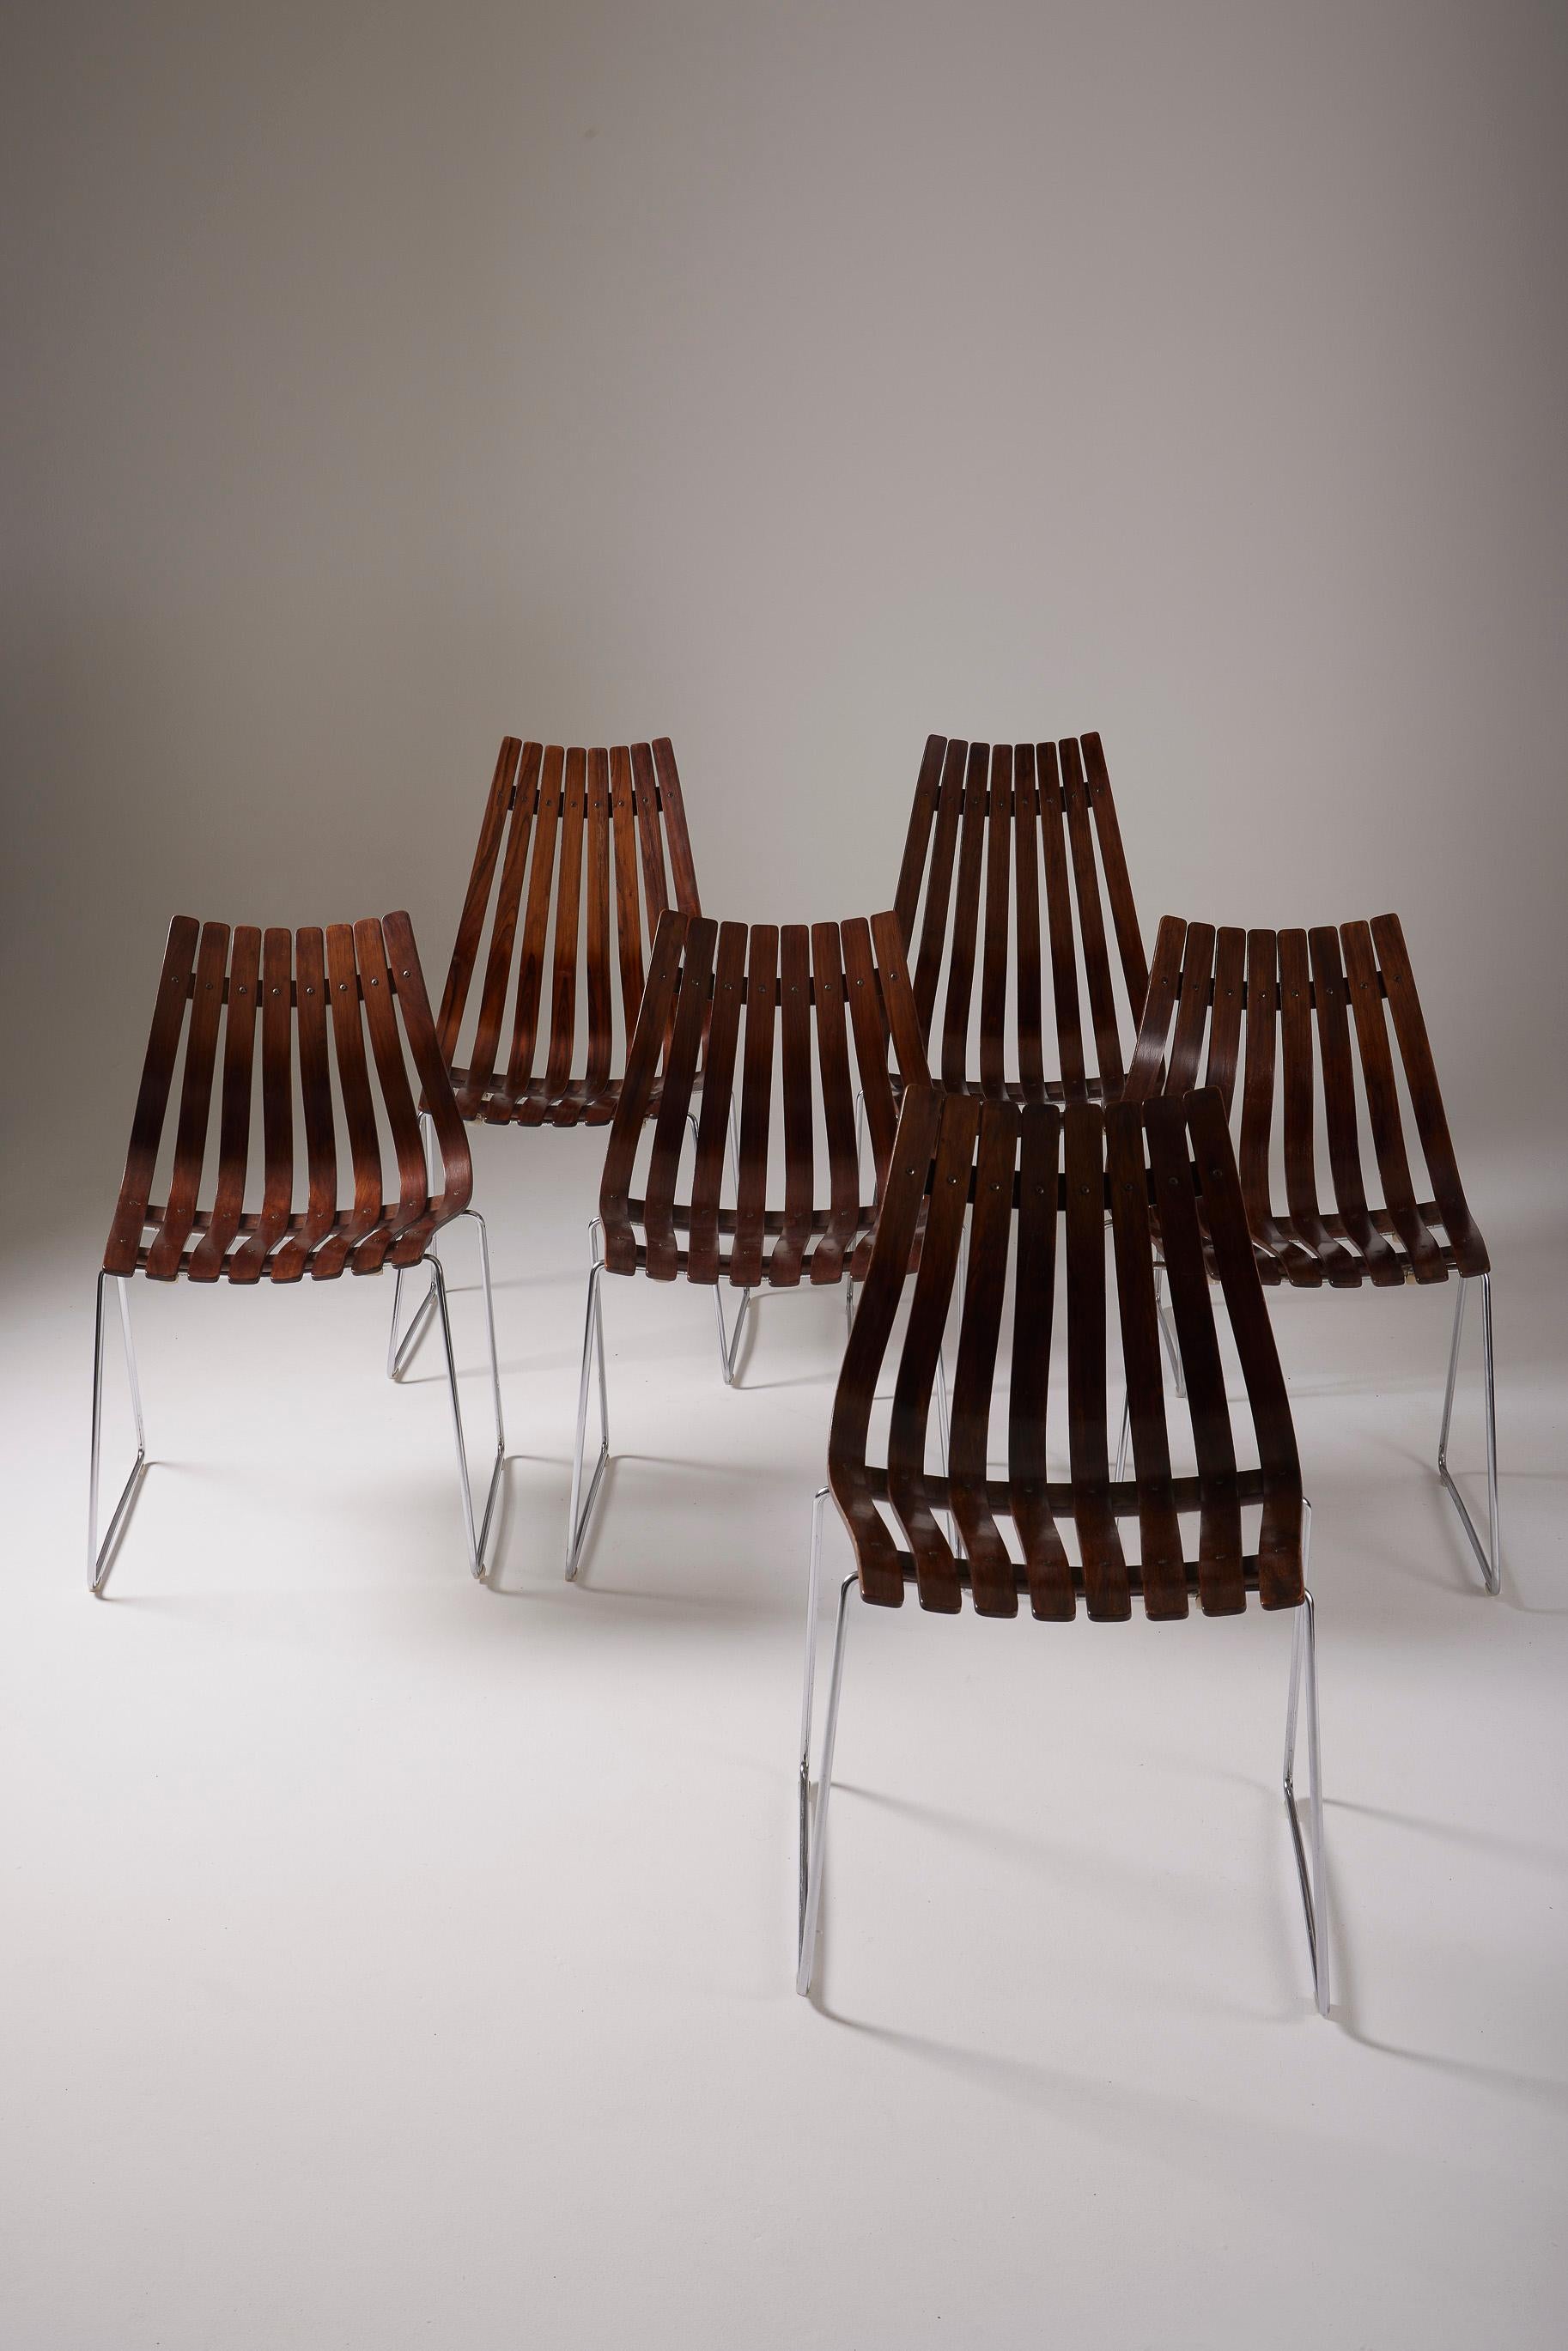  Set of 6 chairs, 